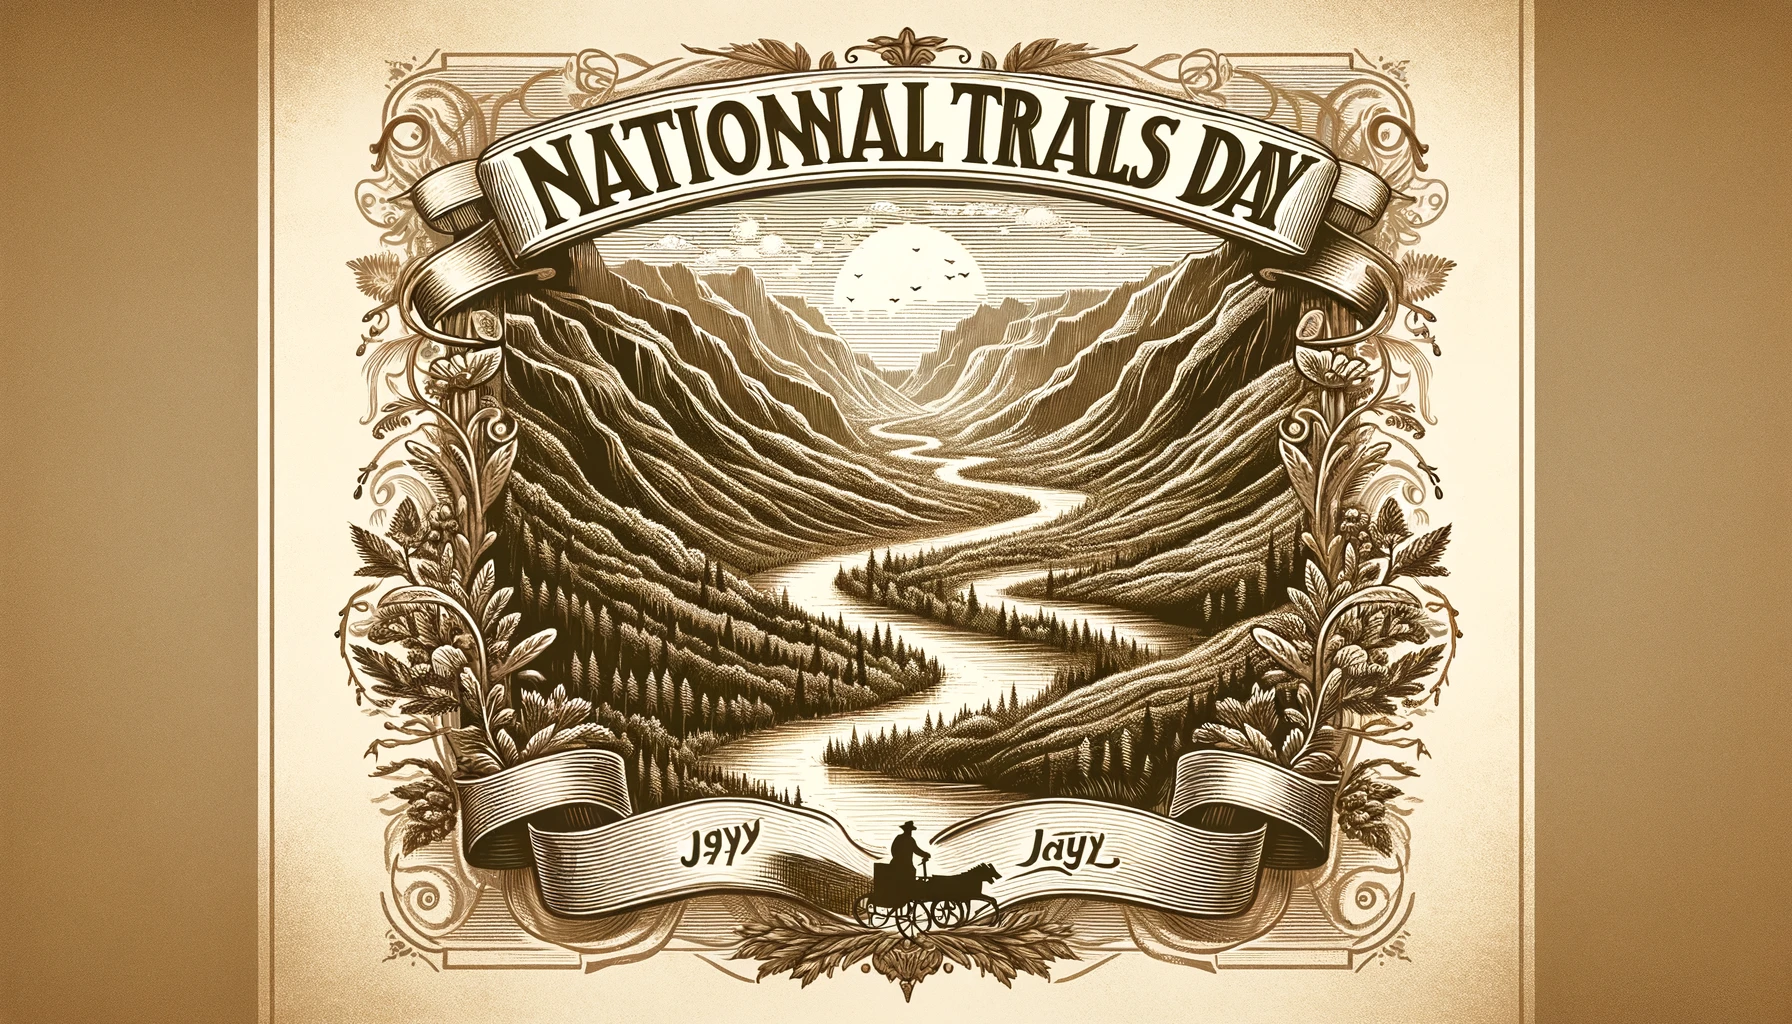 Encouraging National Trails Day Greetings for Nature Lovers